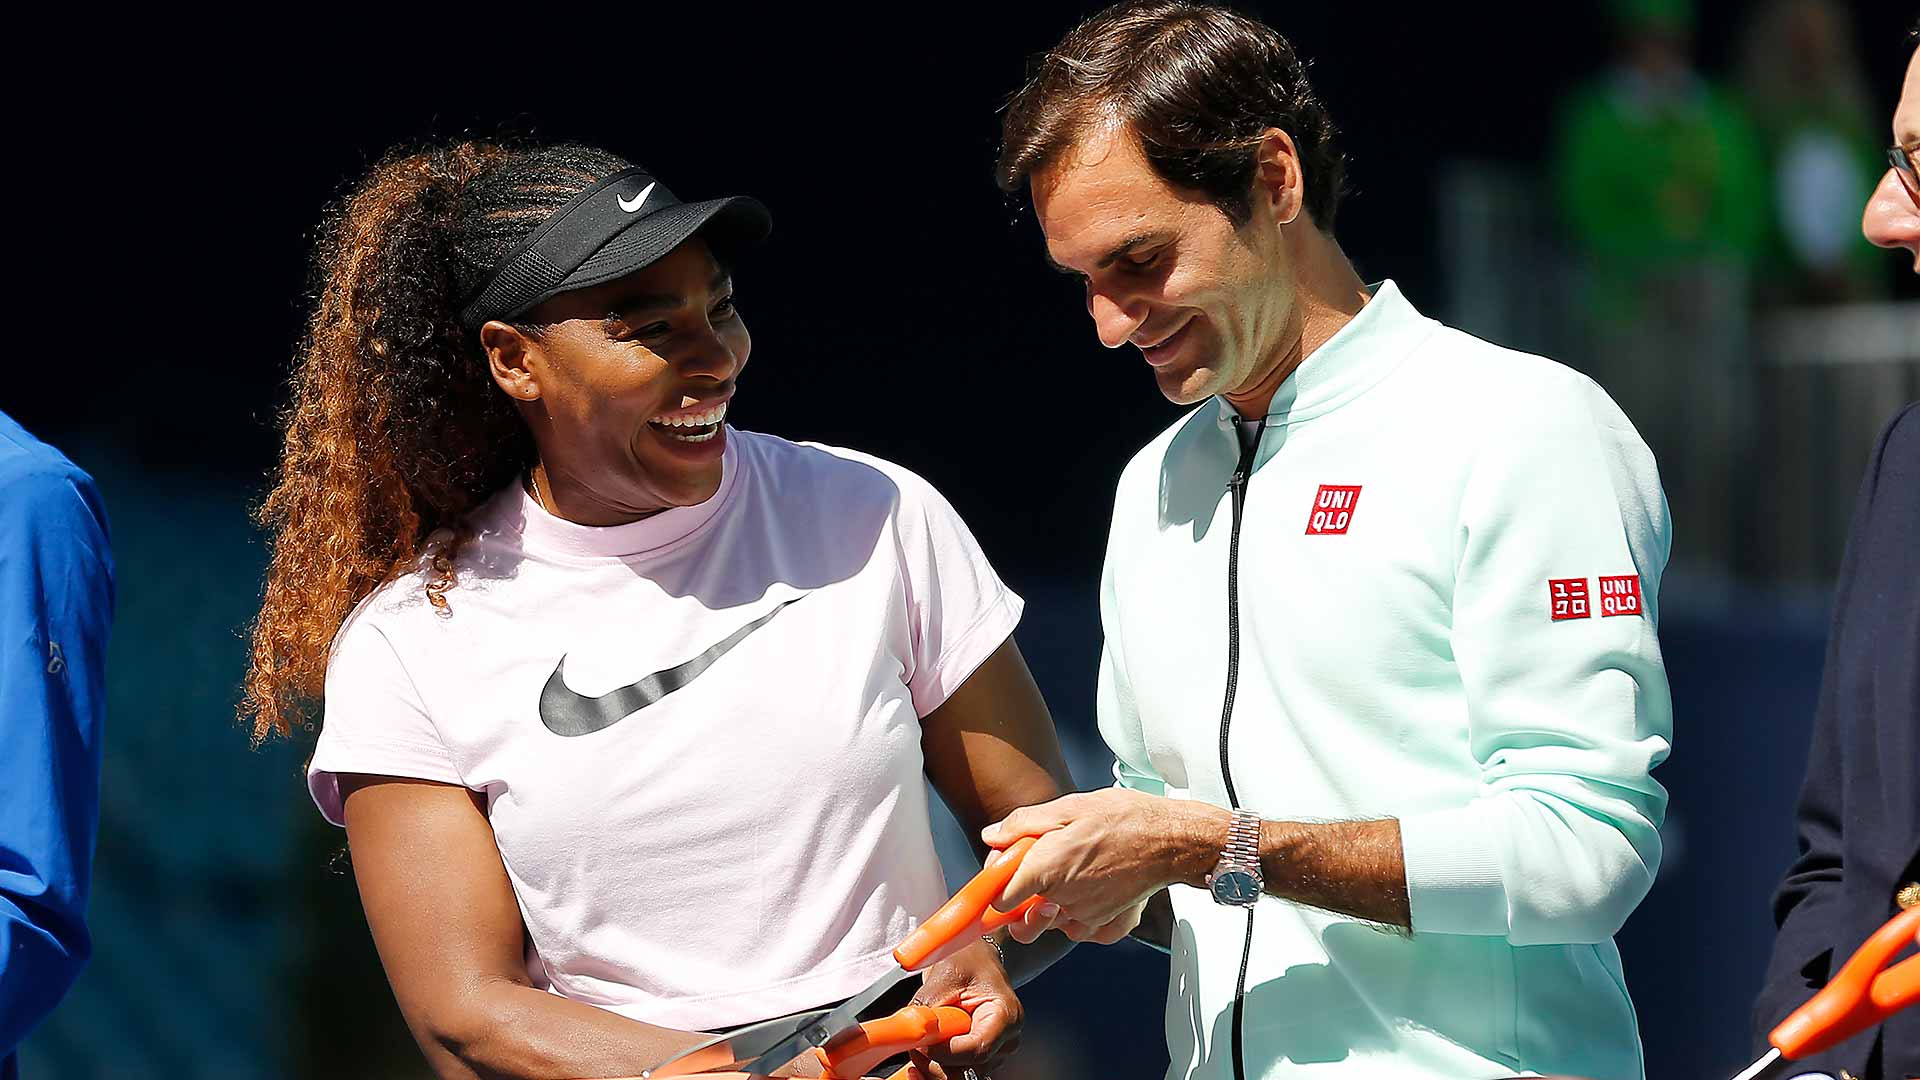 Serena Williams and <a href='https://www.atptour.com/en/players/roger-federer/f324/overview'>Roger Federer</a> at a ribbon-cutting ceremony at the 2019 Miami Open.